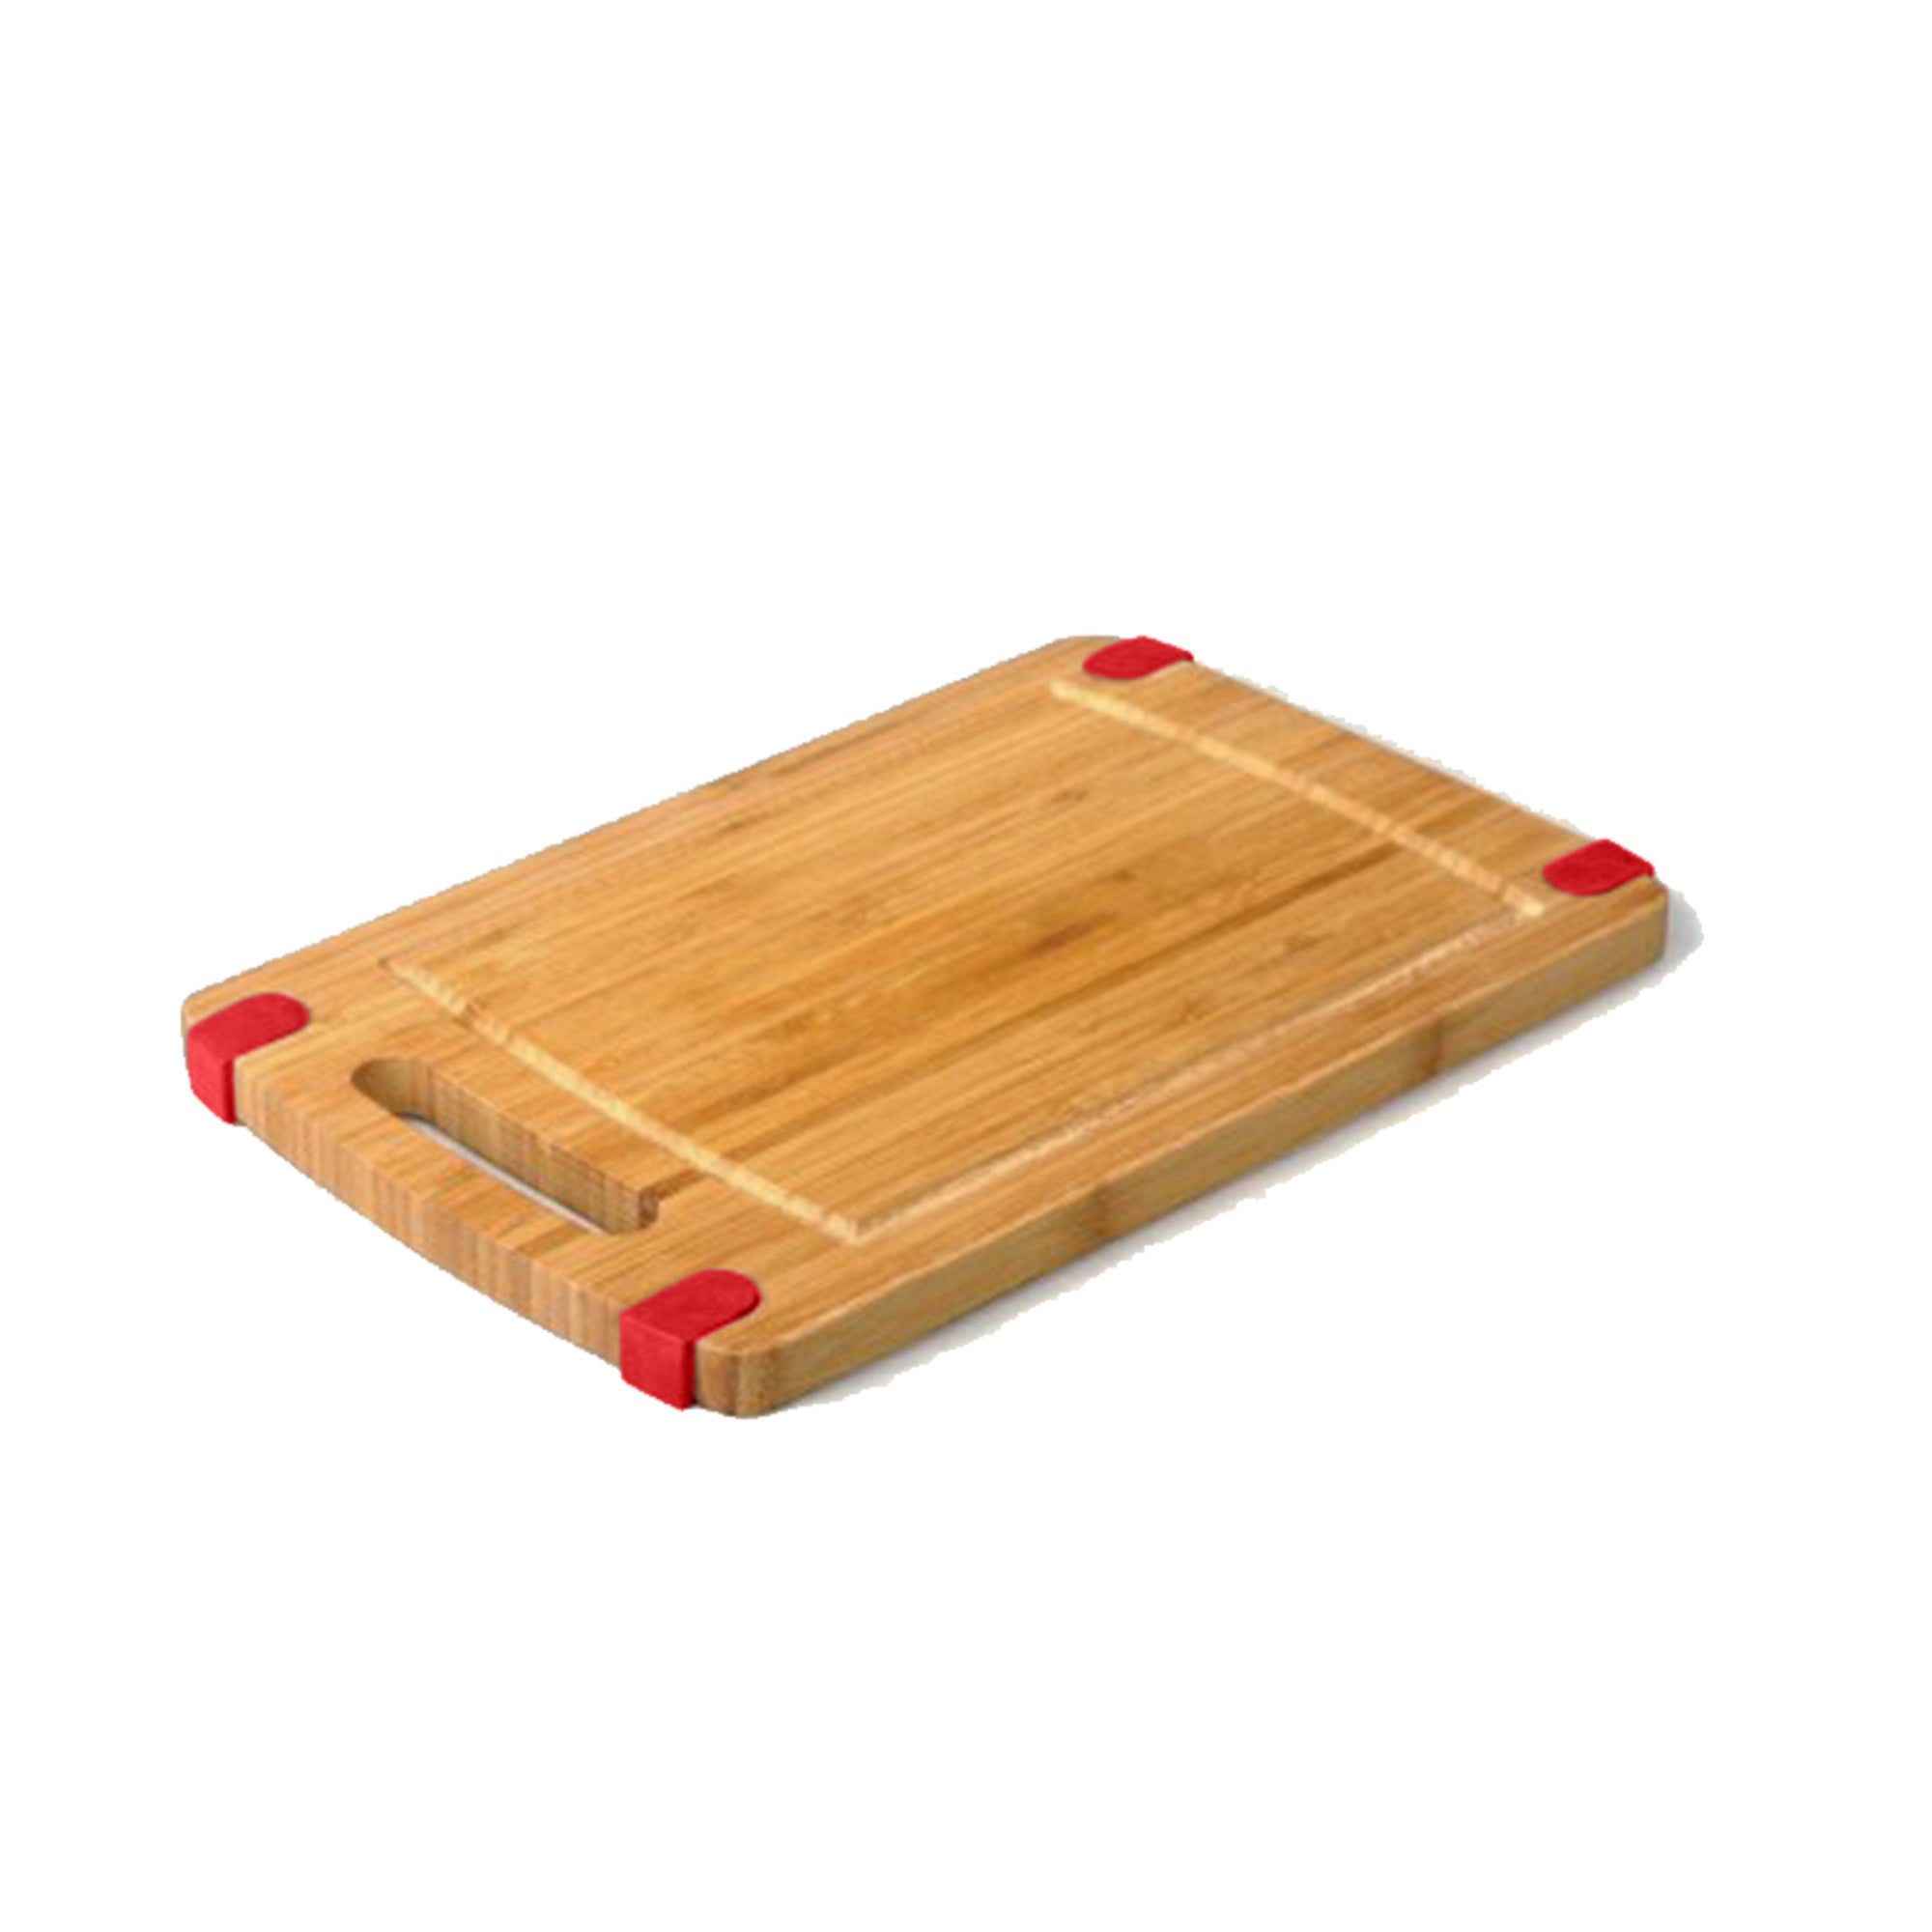 Home Basics 12" x 8" Bamboo Cutting Board - Assorted Colors